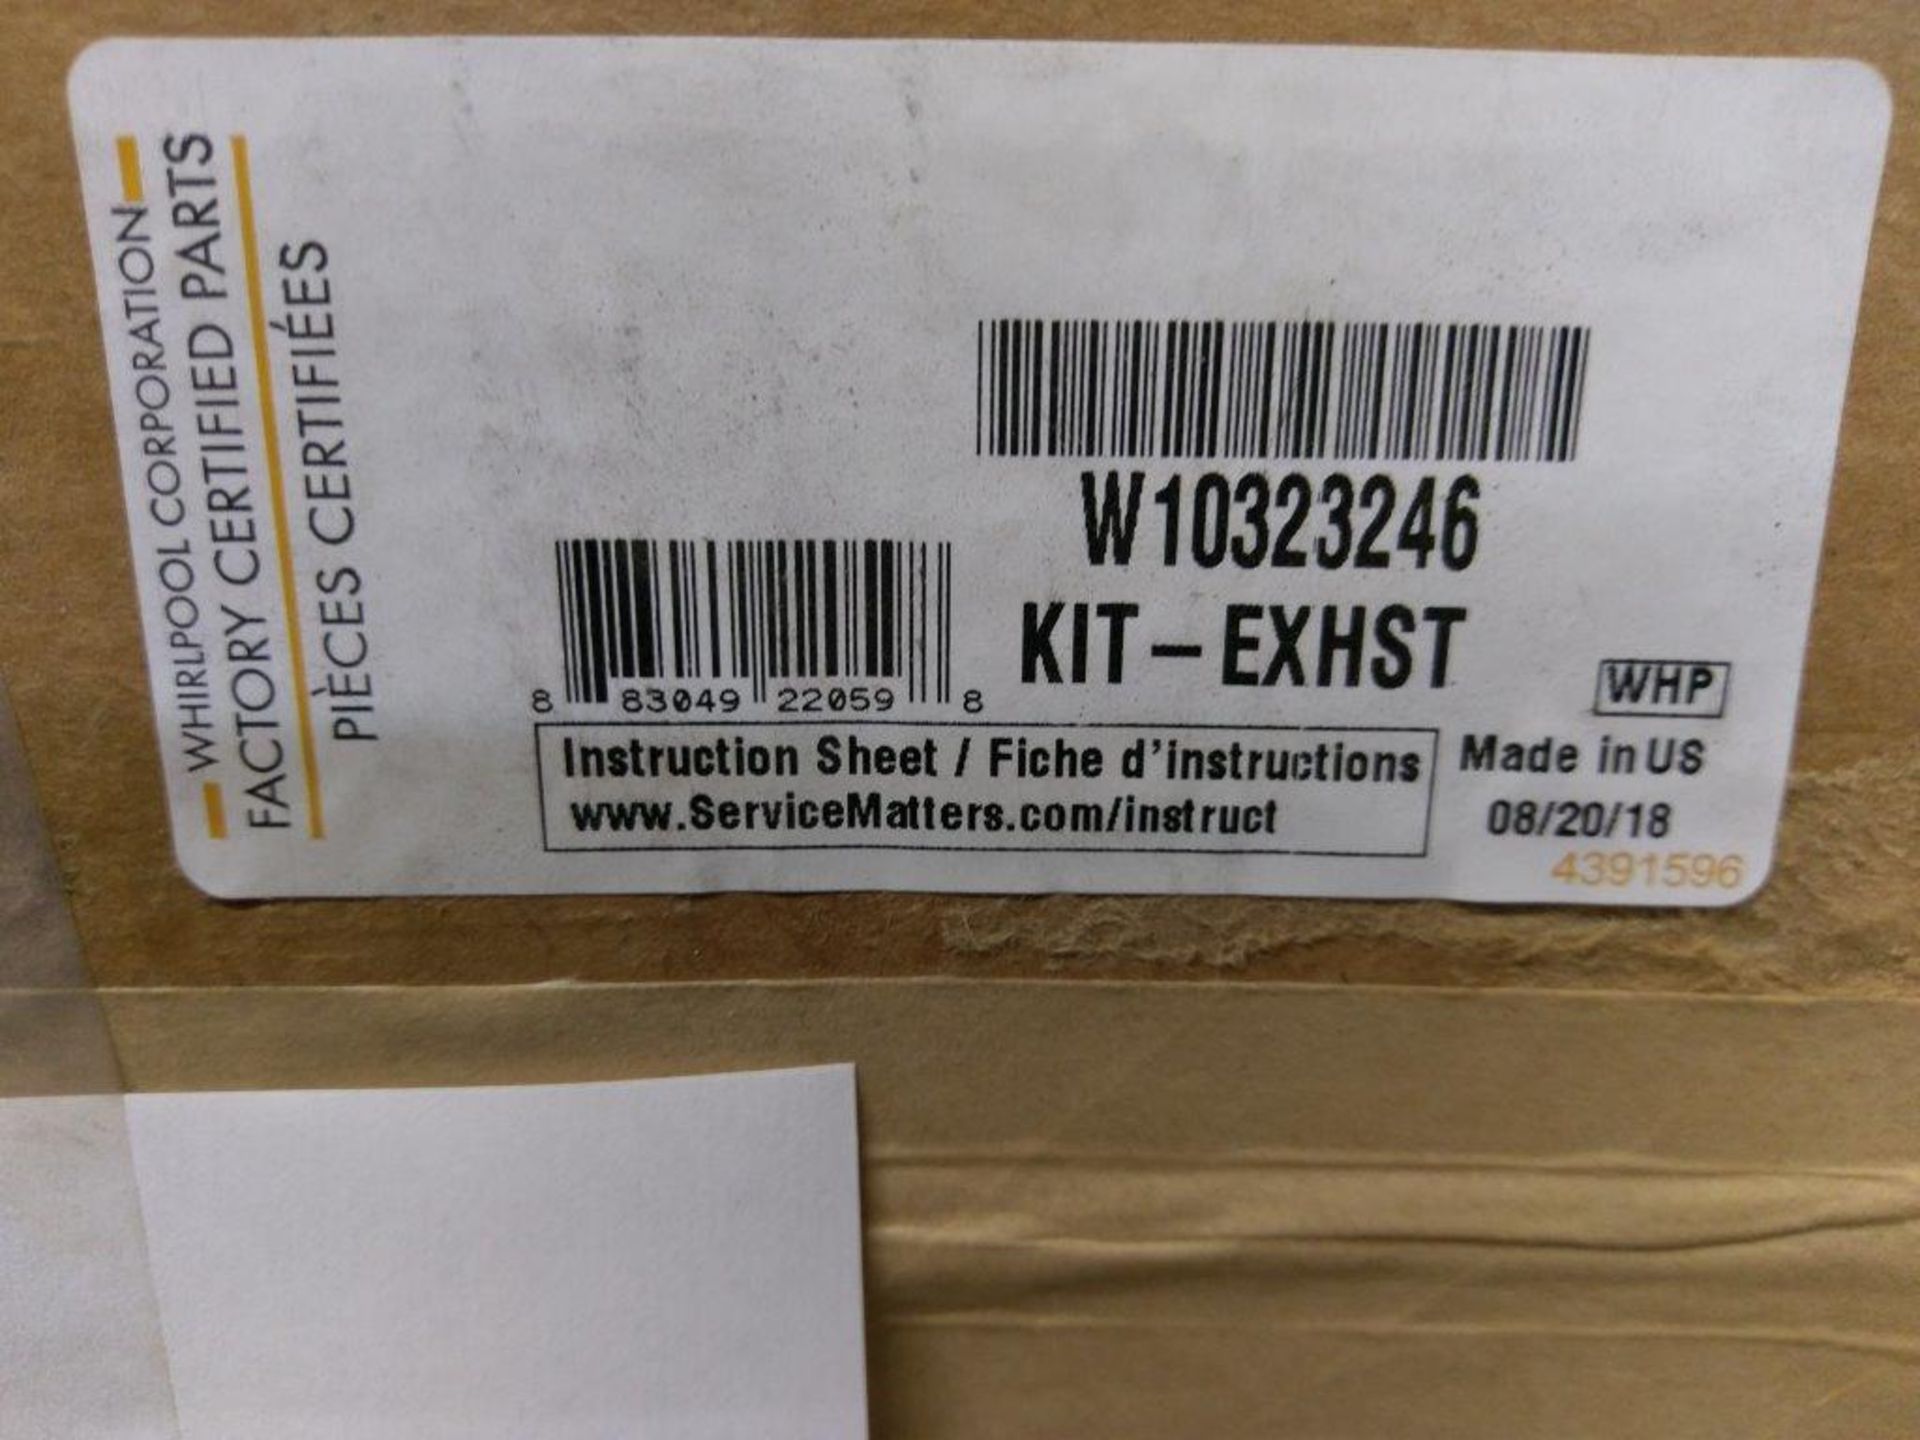 Lot of 10 New Whirlpool KIT-EXHST W10323246 - Image 5 of 6